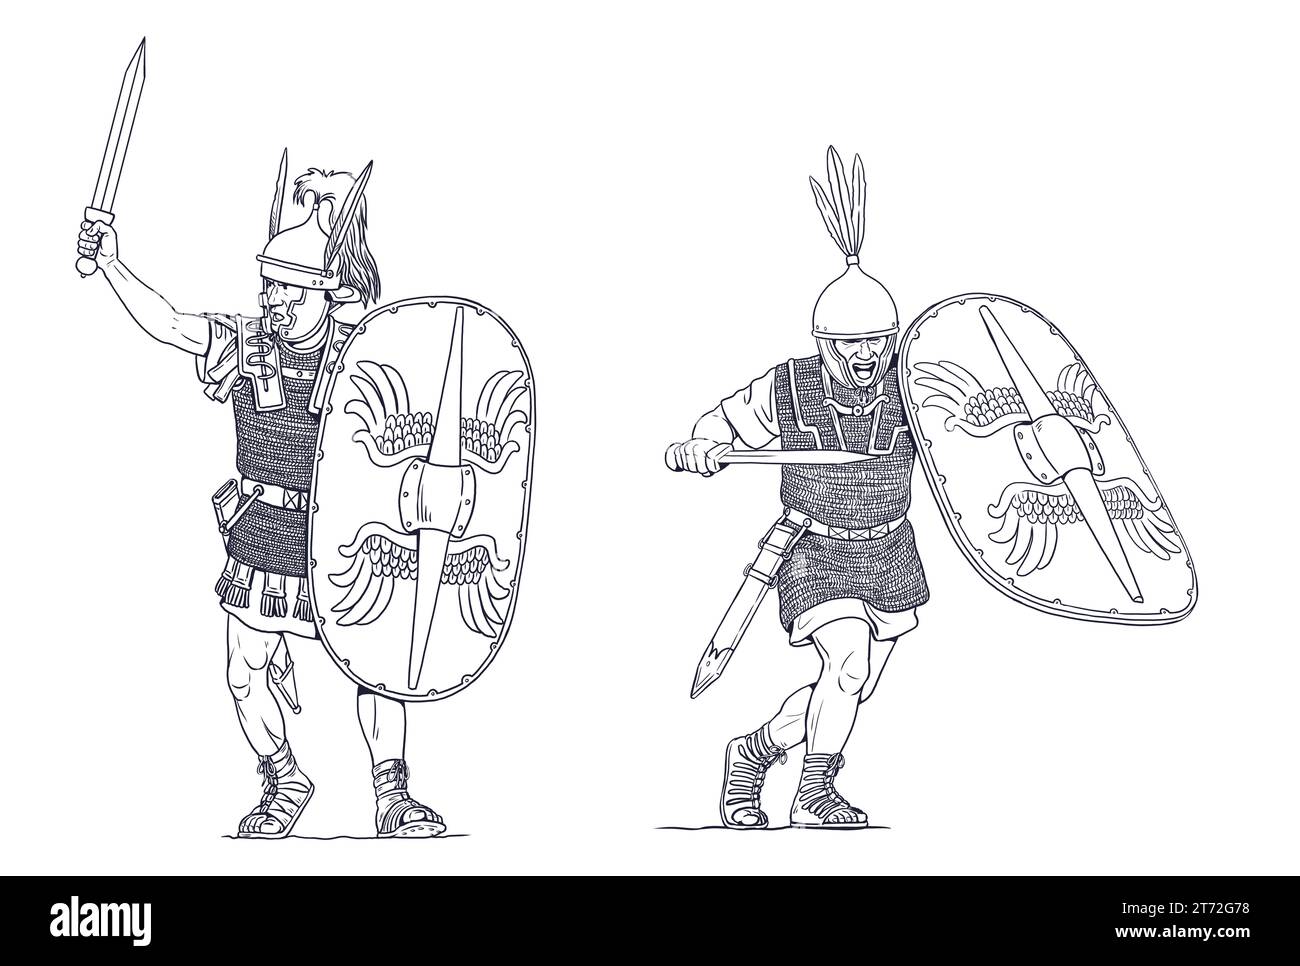 Roman legionnaires in battle. Punic Wars. Historical drawing with antiques soldiers. Stock Photo